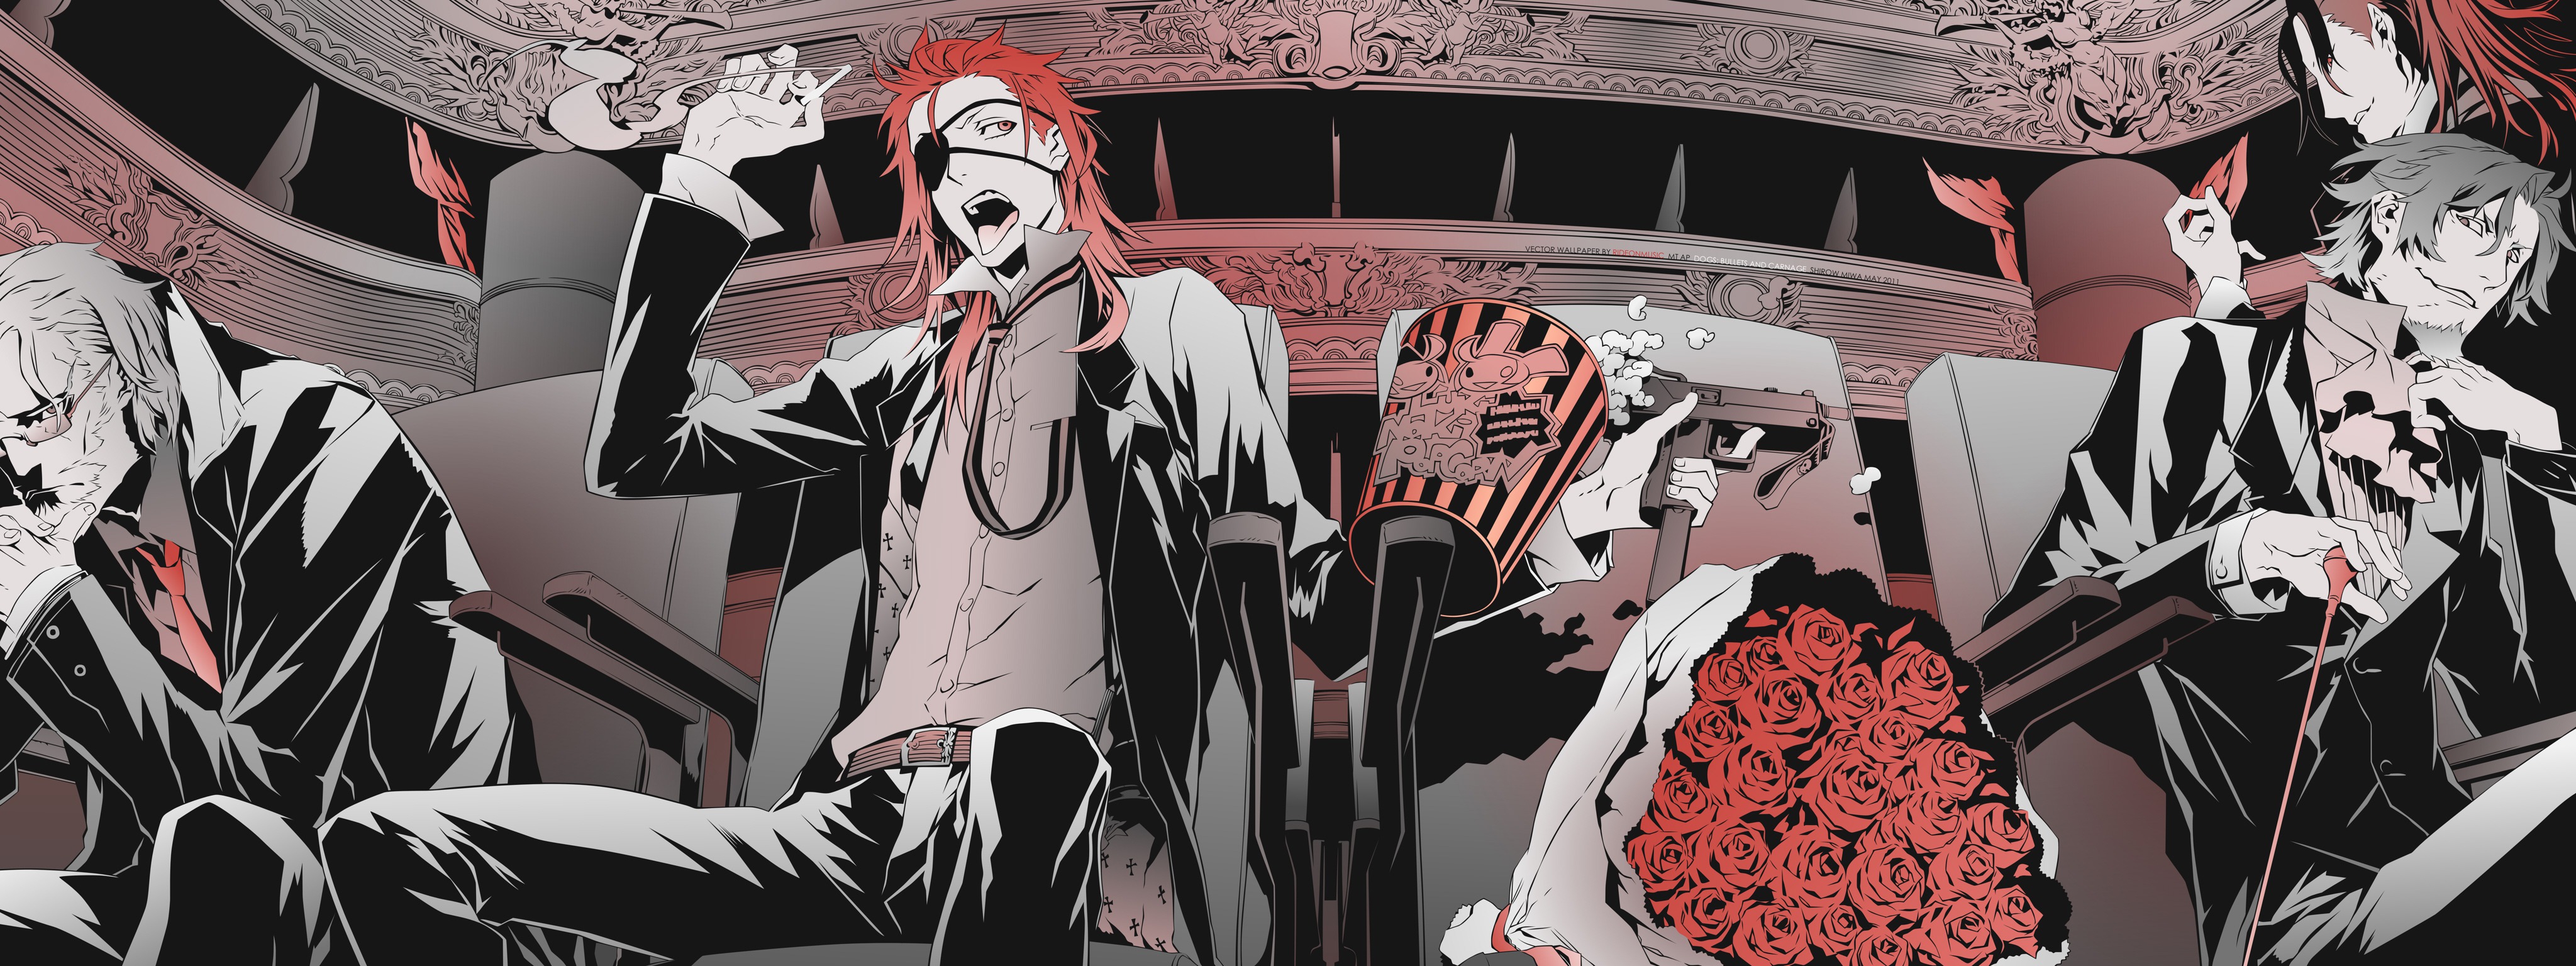 Anime Dogs Bullets Amp Carnage 4096x1536